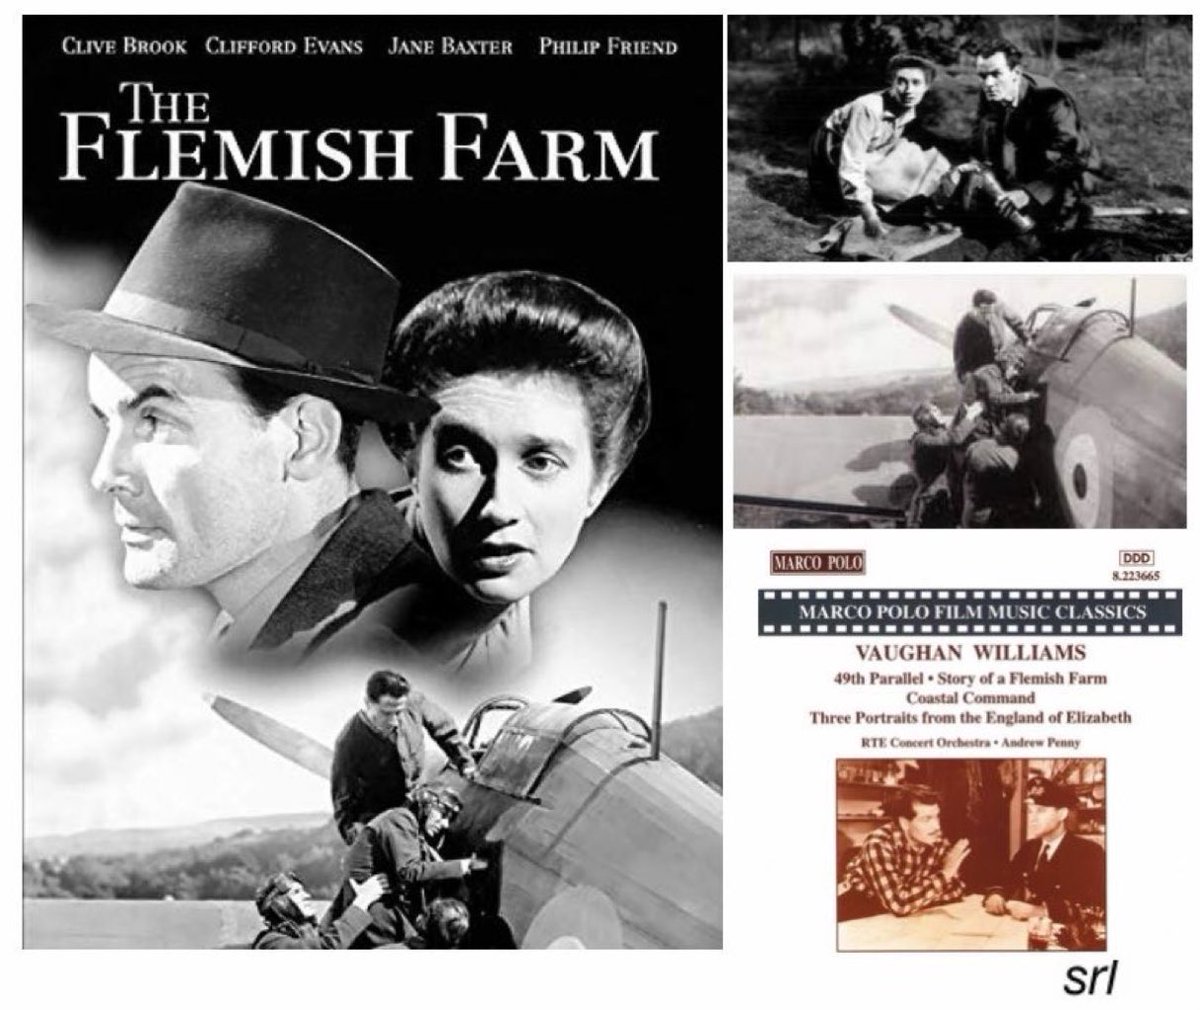 3:10pm TODAY on @TalkingPicsTV 

The 1943 #War film🎥 “The Flemish Farm” directed by #JeffreyDell & co-written with #JillCraigie.  Based on a true story.

🌟#CliveBrook #CliffordEvans #JaneBaxter #WylieWatson #PhilipFriend

🎶Music by #RalphVaughanWilliams